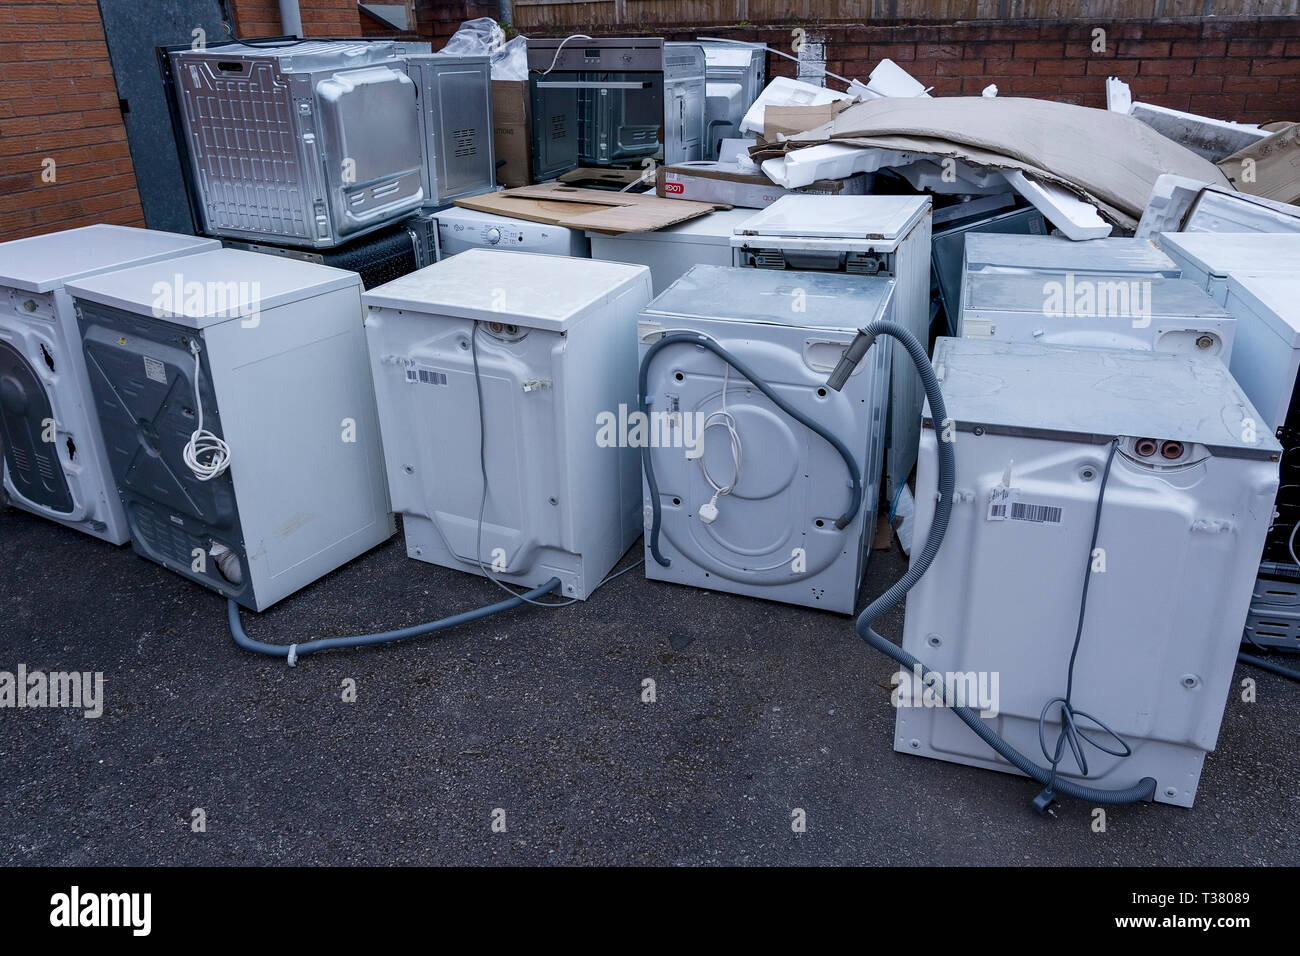 Old washing machines, ovens and other white goods destined for scrap Stock Photo